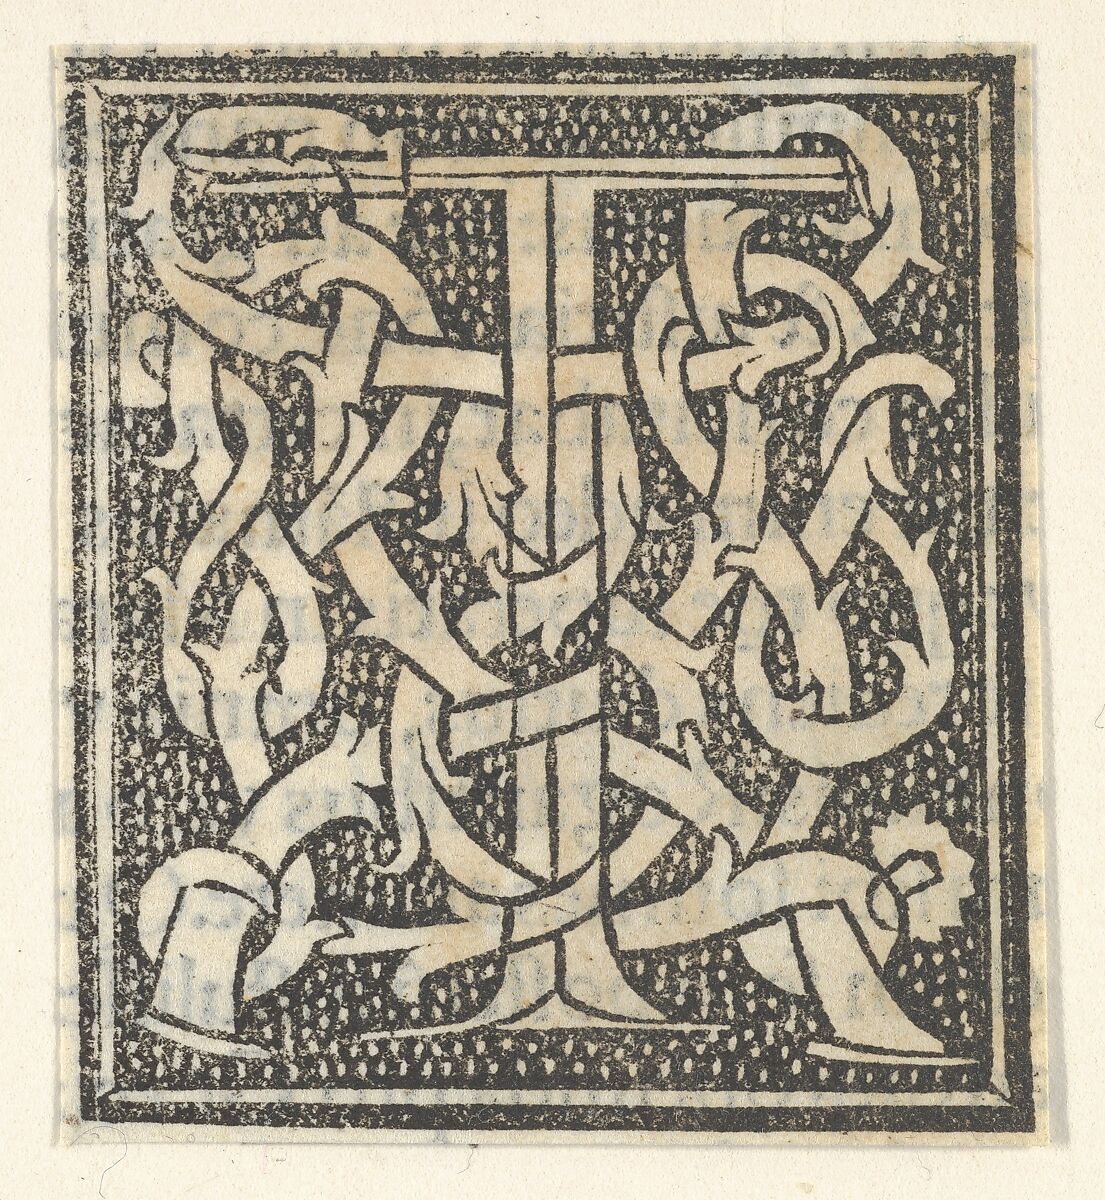 Initial letter T on patterned background, Anonymous, Italian, 16th century, Woodcut, criblé ground 